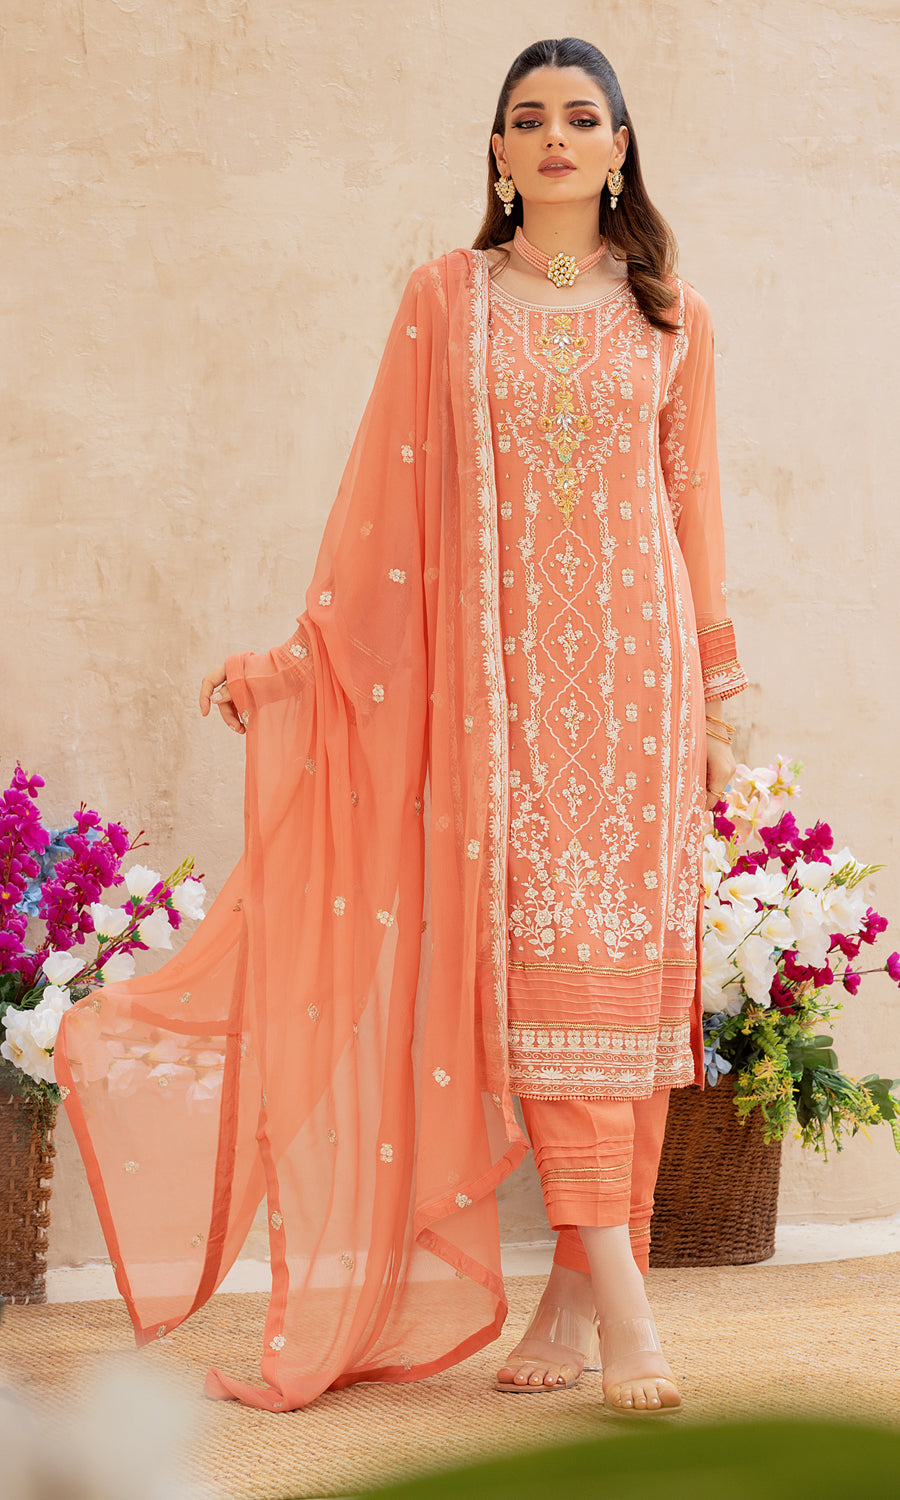 Shamooz- Mushq Volume 3. Step into elegance with style masterpiece with vibrant color and embrodiery work on the front and side panel that enhances a pop of color.The delicately hand-embellished add-on sparkle of glamour.This ensemble is a perfect balance of every occassion.